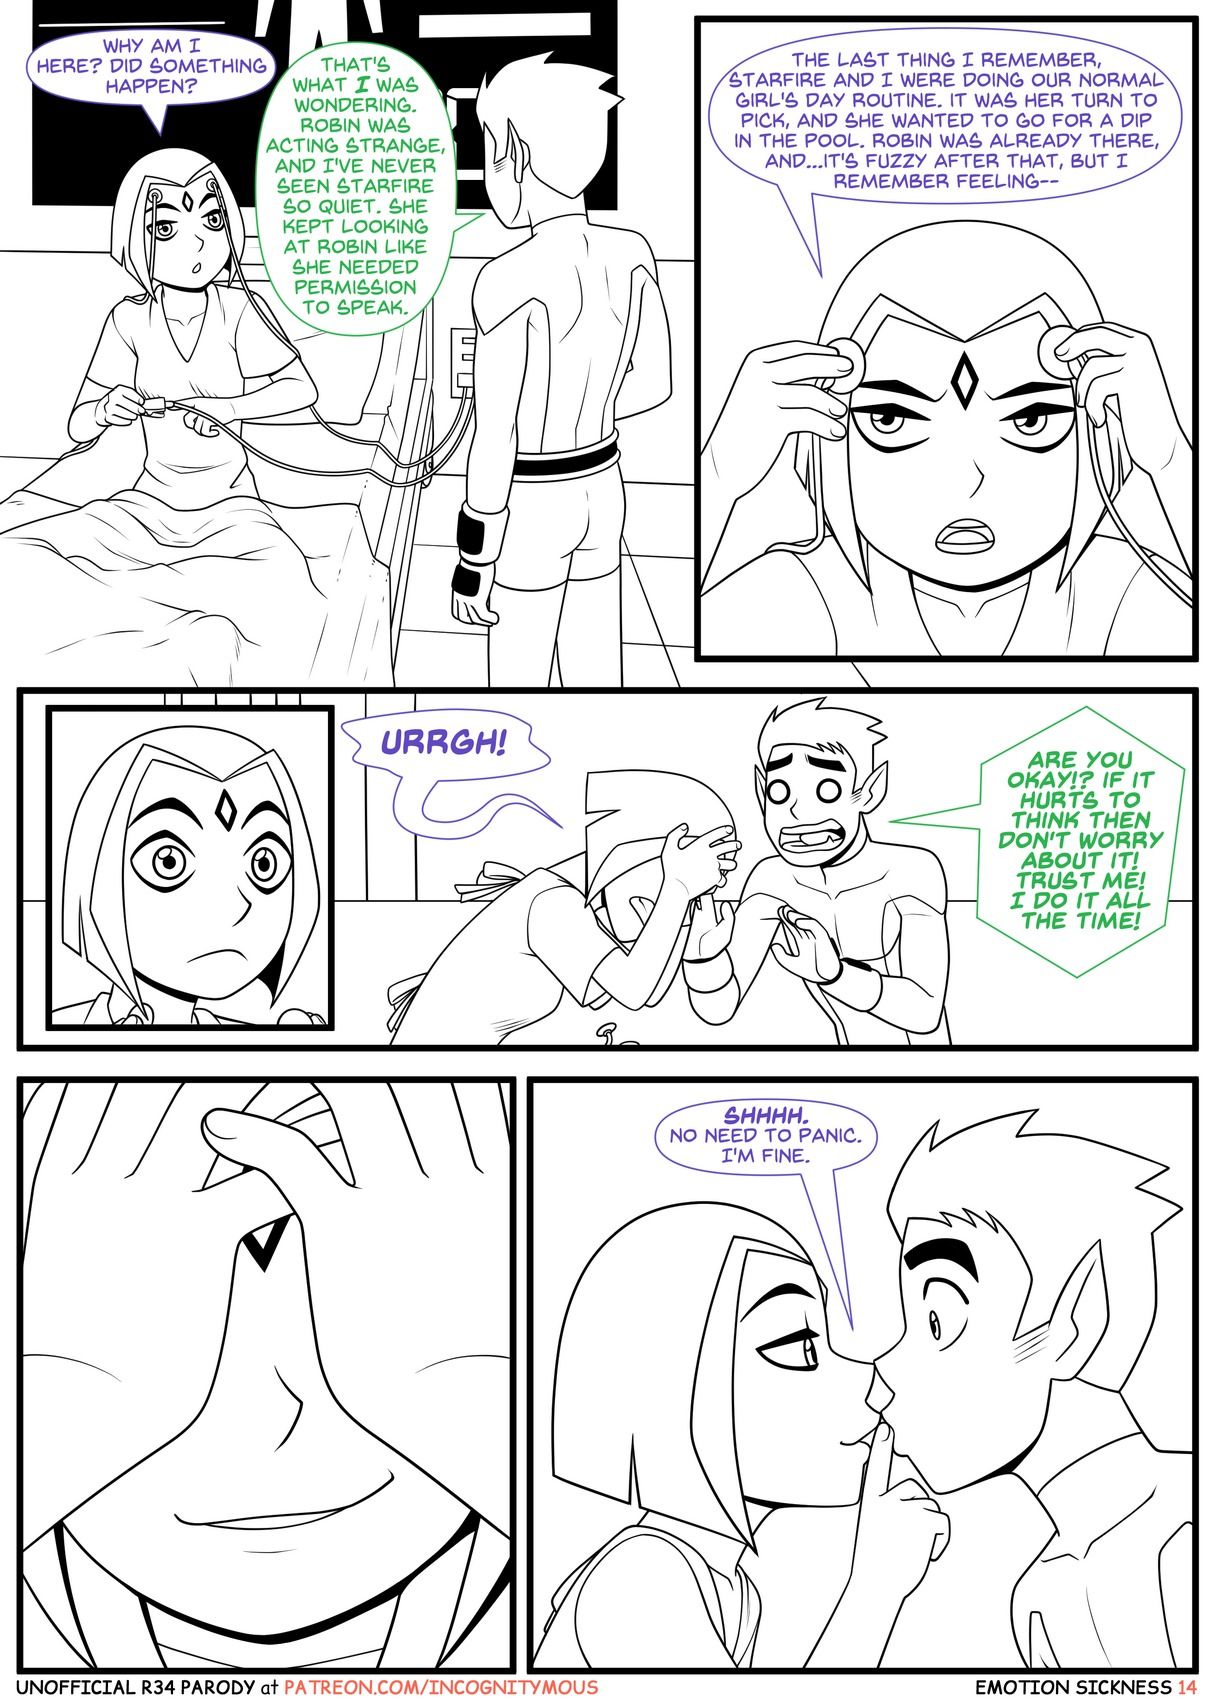 Teen Titans - Emotion Sickness (Incognitymous) page 28